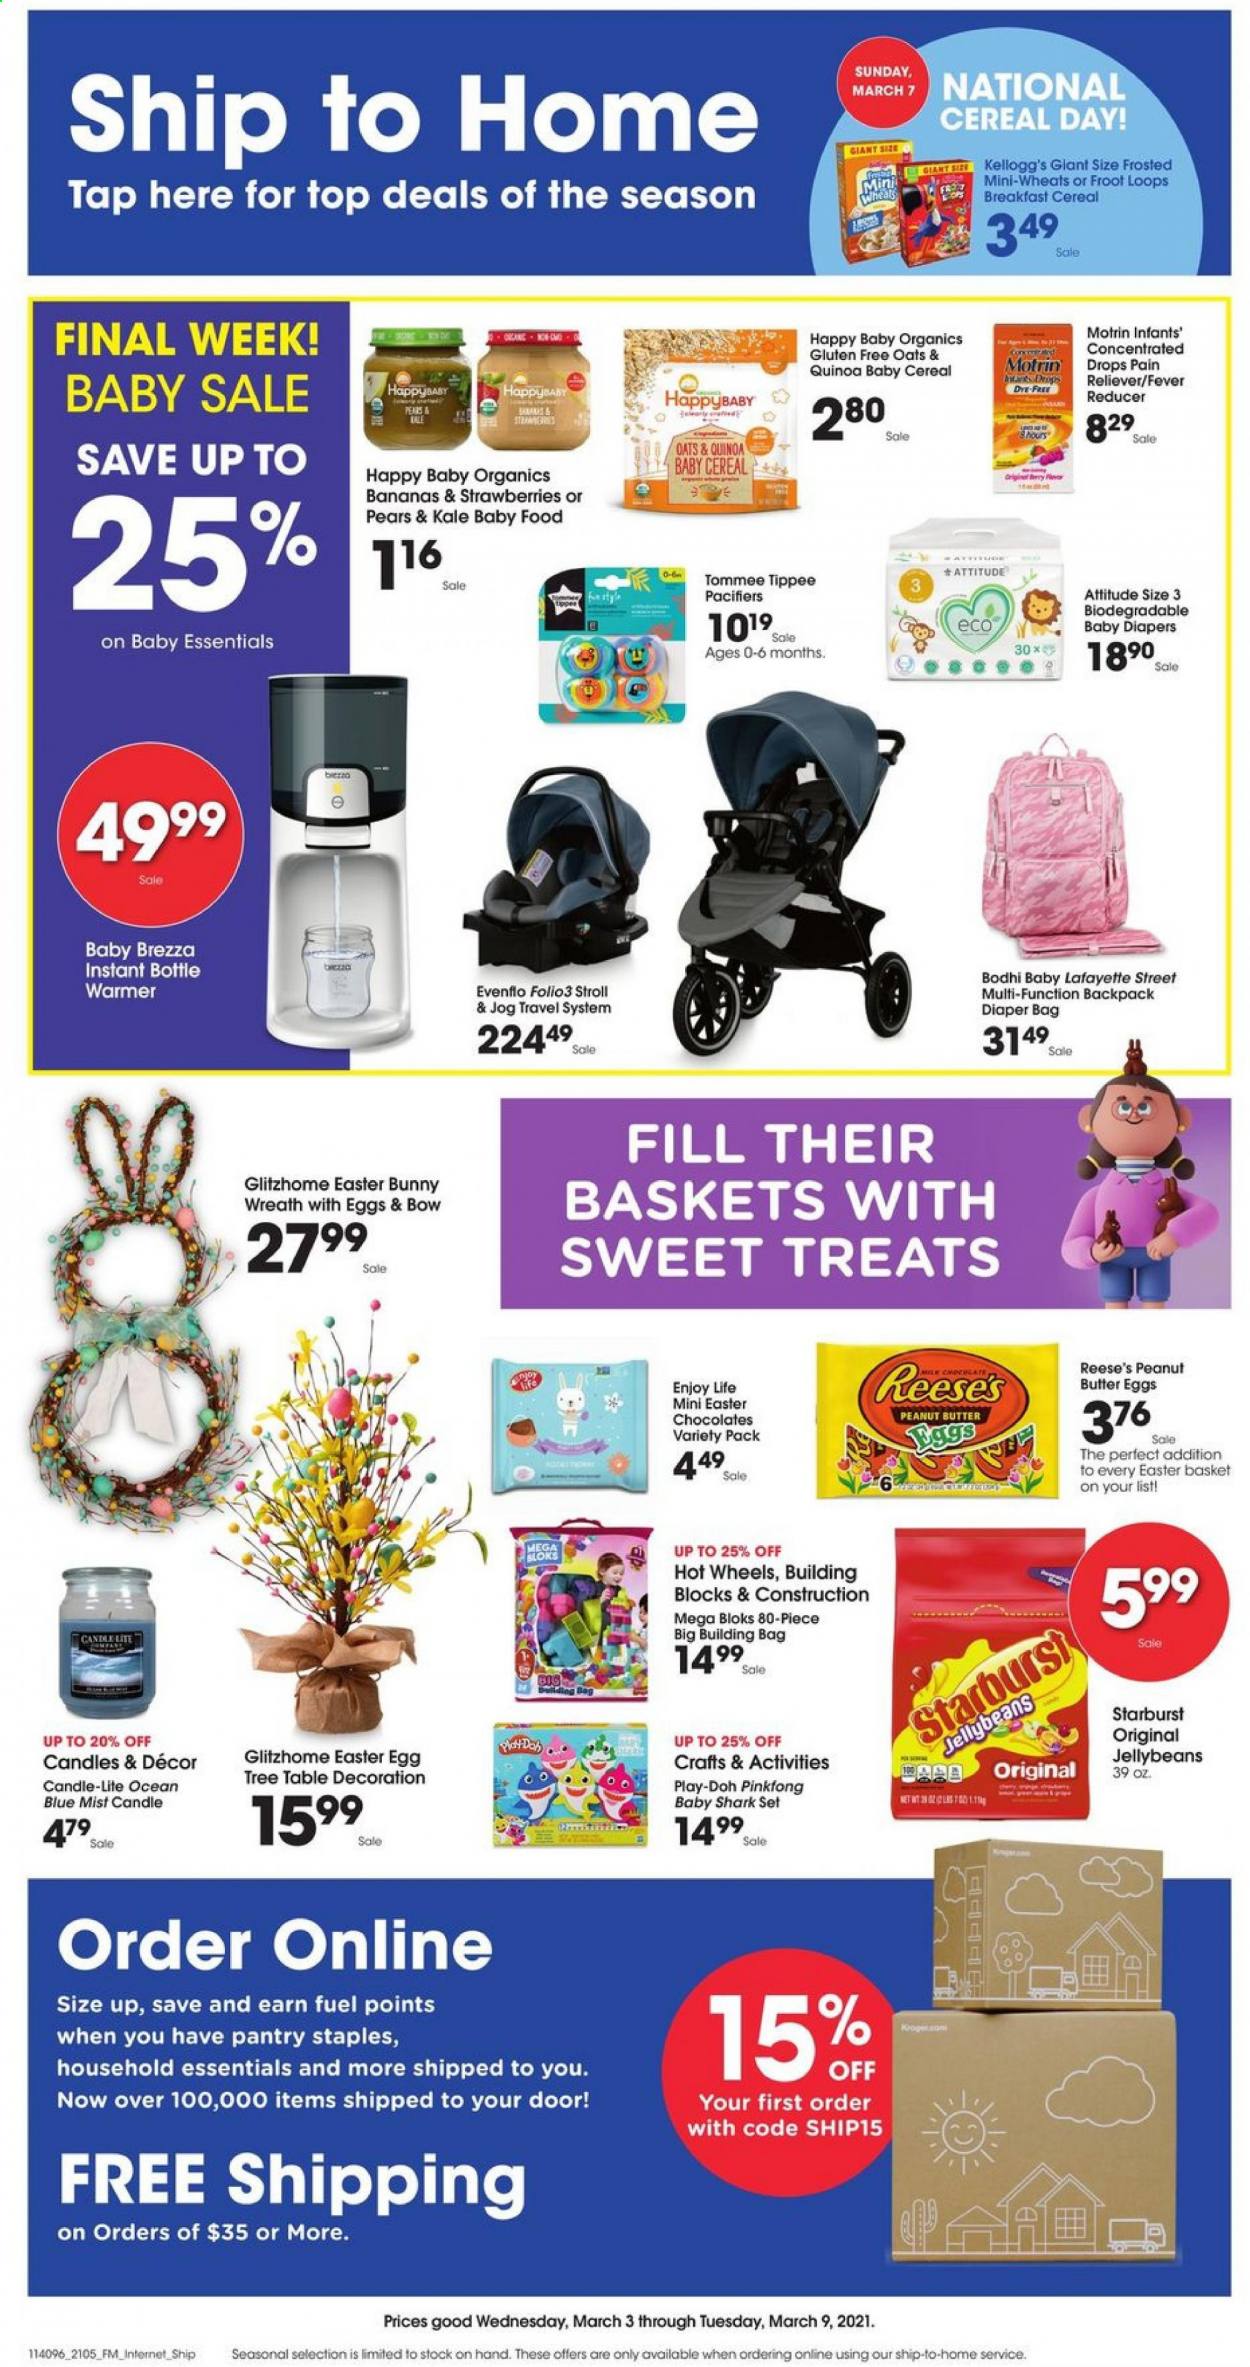 thumbnail - Baker's Flyer - 03/03/2021 - 03/09/2021 - Sales products - bananas, pears, eggs, Reese's, strawberries, chocolate, Kellogg's, Starburst, oats, cereals, peanut butter, basket, candle, table, wreath, easter egg, building blocks, Mega Bloks, Play-doh, Hot Wheels, Motrin. Page 1.